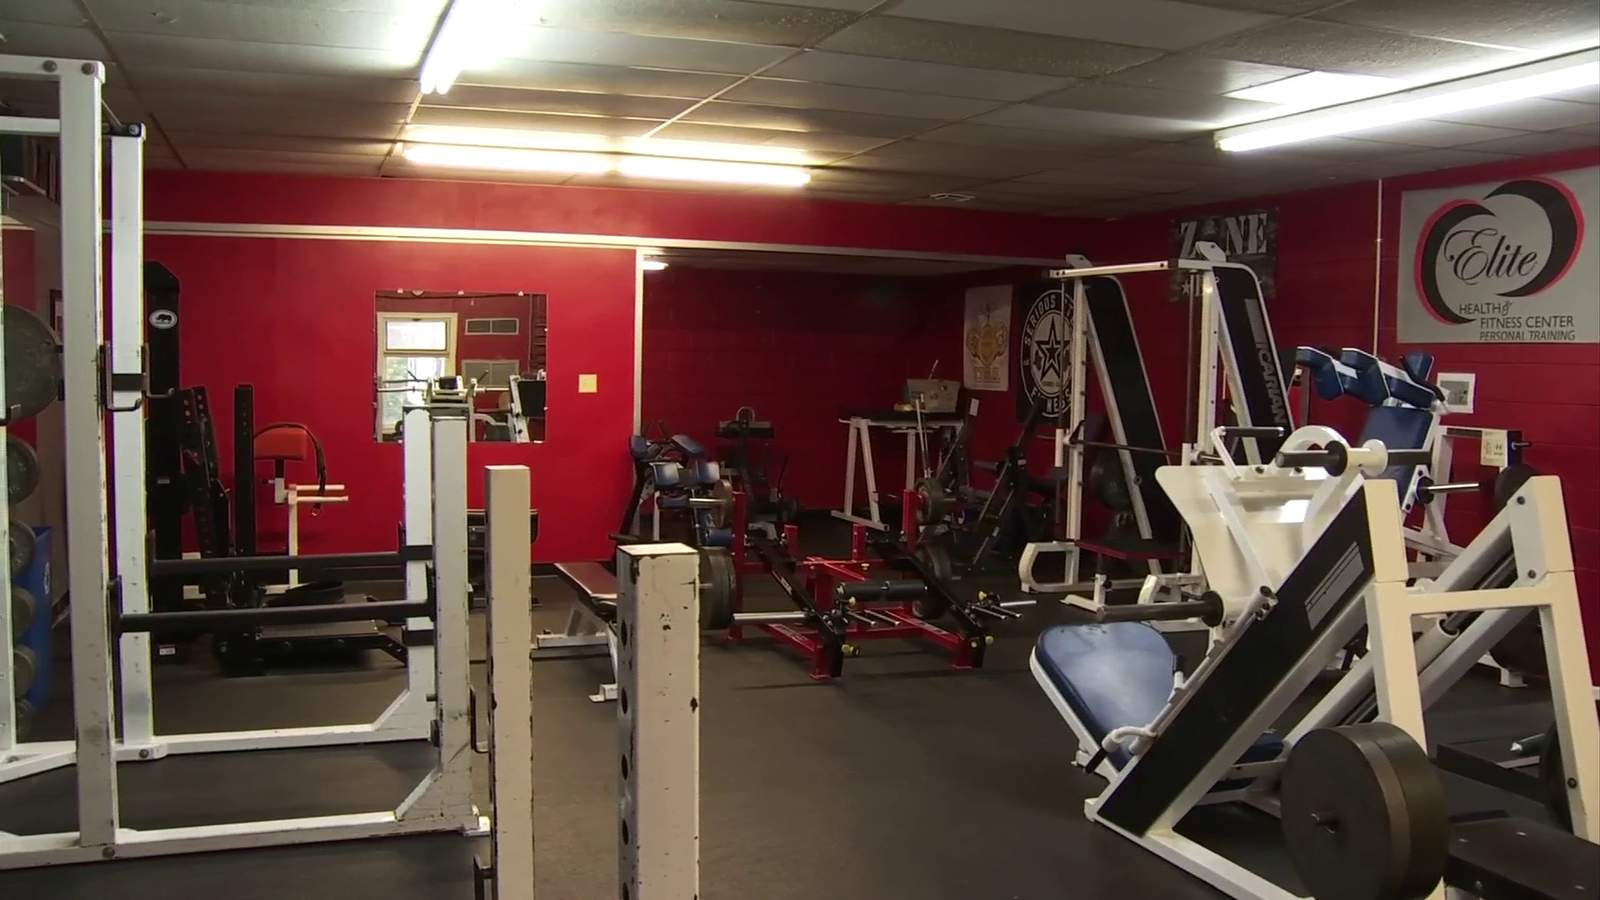 'My gym is clean. Its safer than Walmart: Roanoke gym owner urges Gov. Northam to ease reopening restrictions